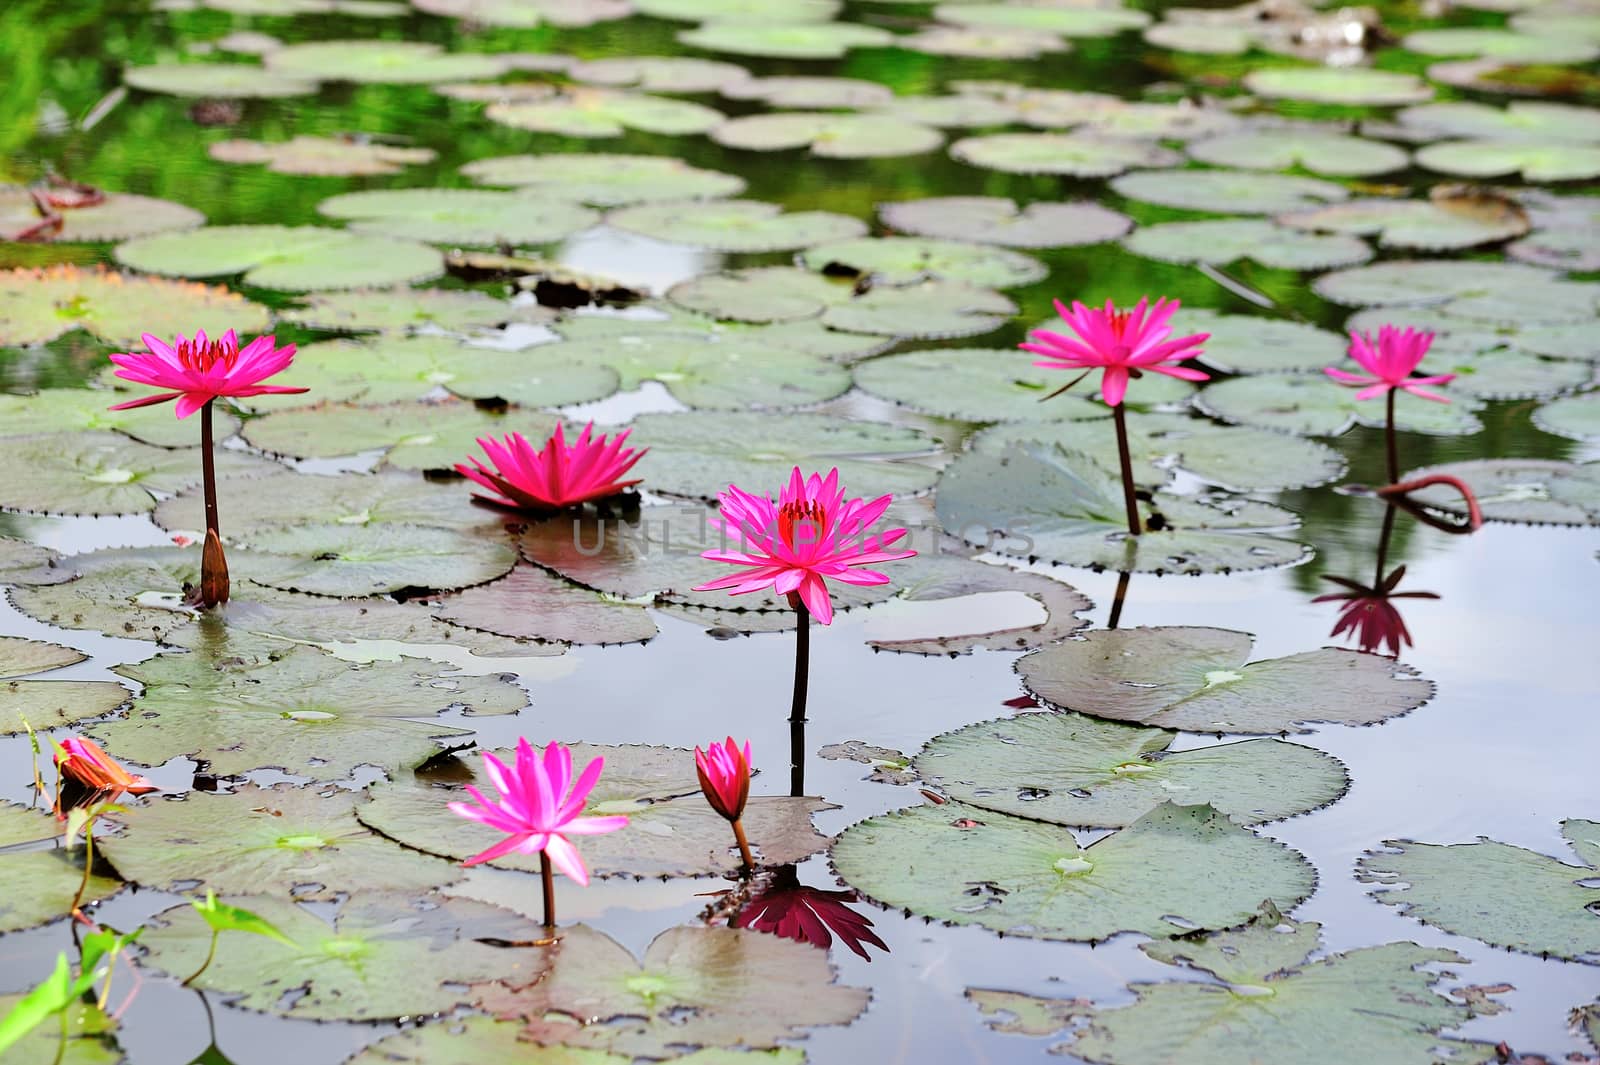 pink lotus flower blooming at summer by sommai